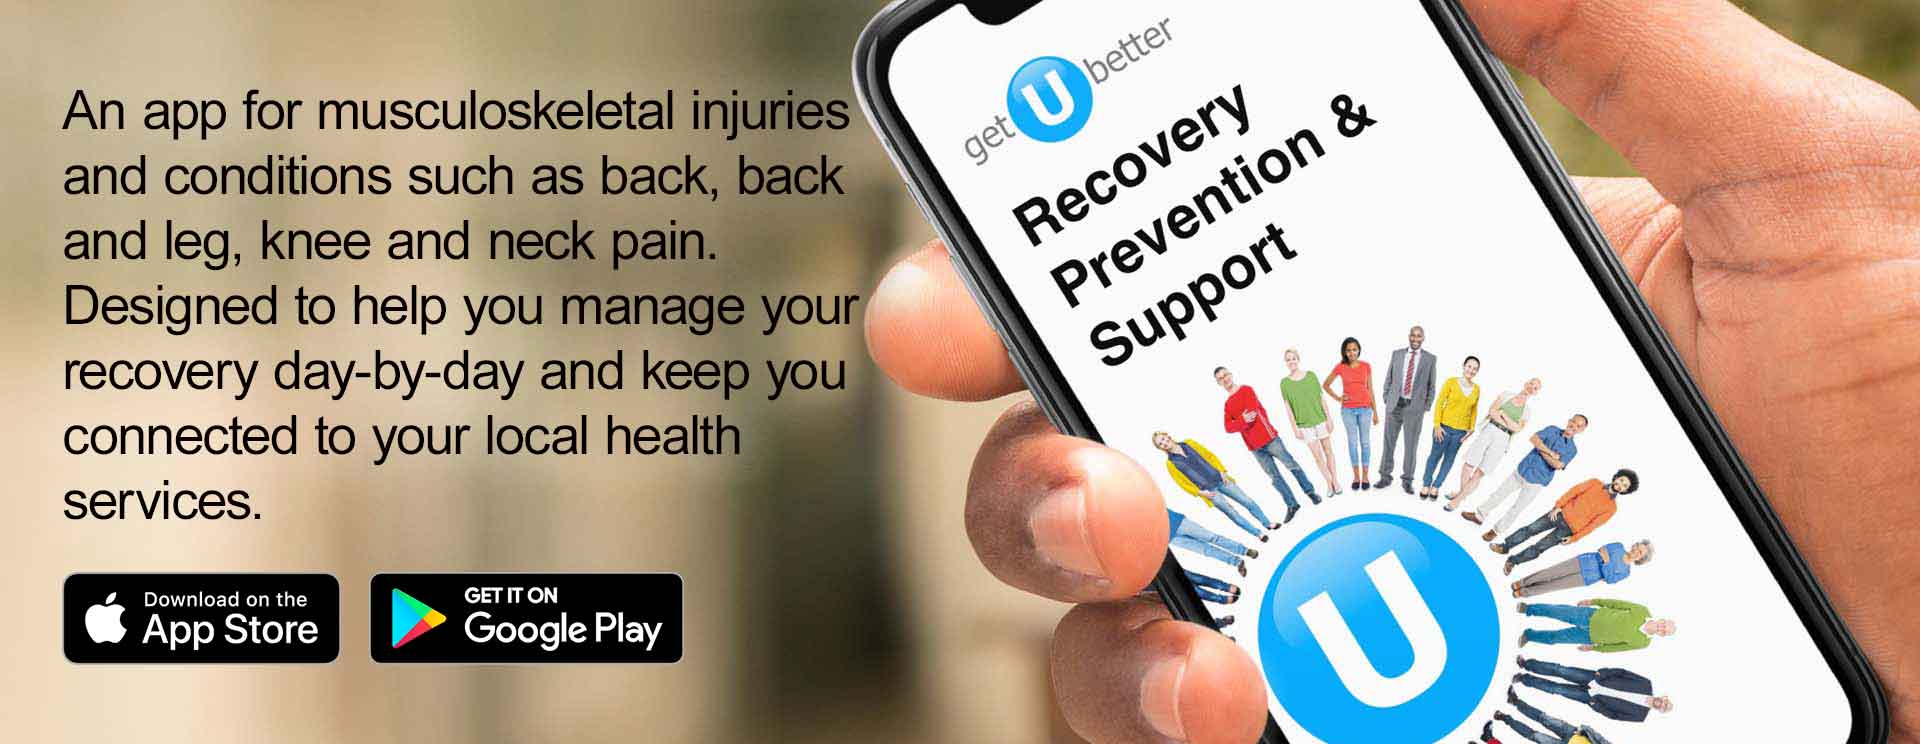 Get U Better app for musculoskeletal injuries and contiditons.